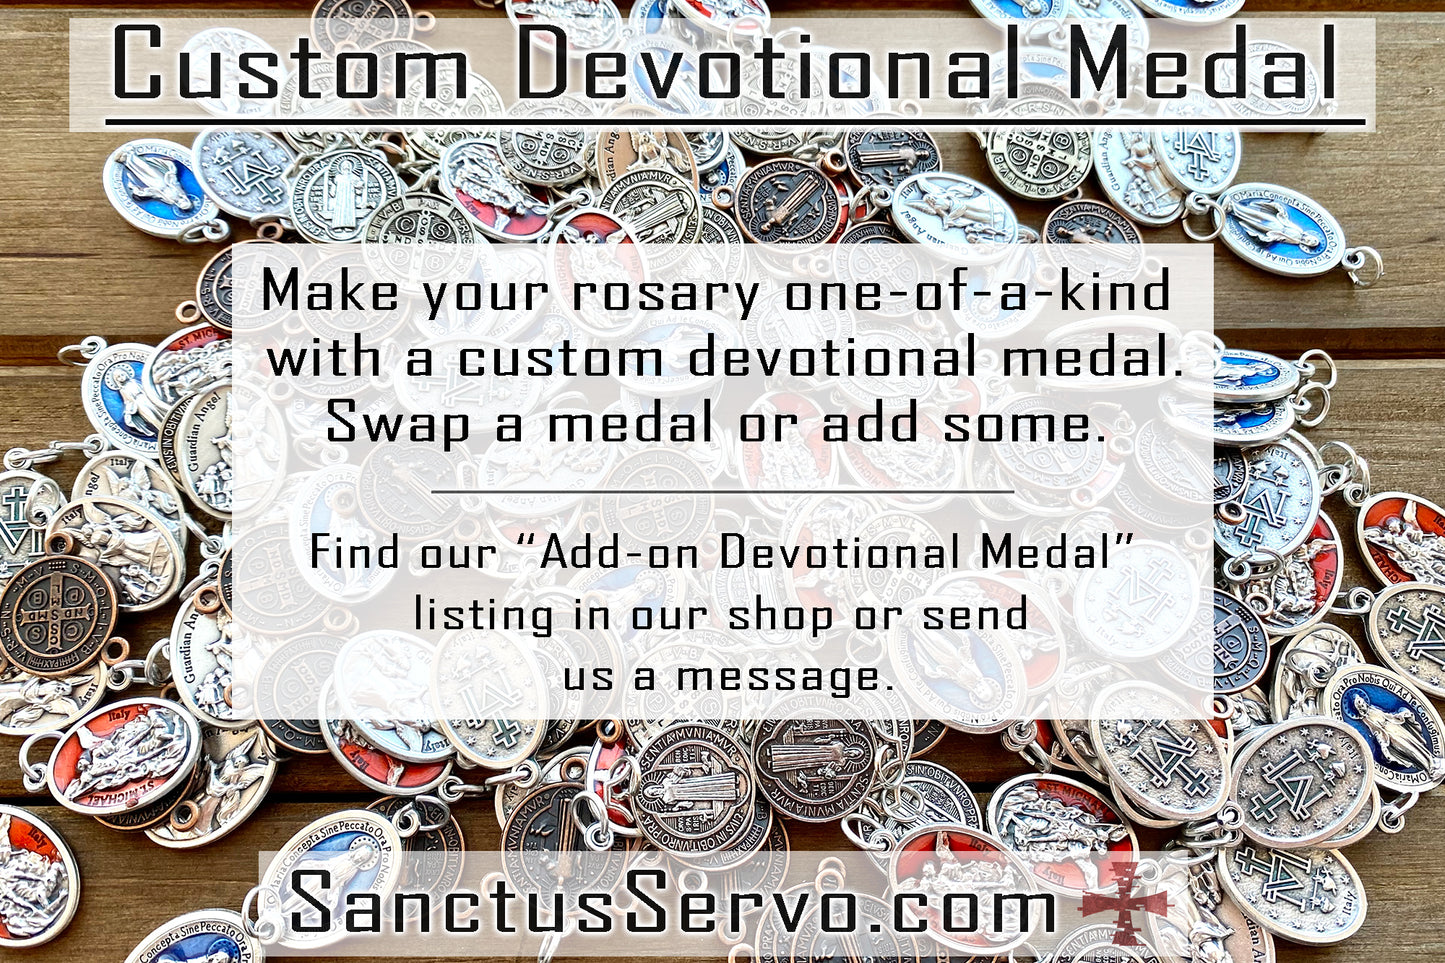 Customize your rosary with an Add-on Devotional Medal - Catholic Patron Saint Medals, a unique addition for your spiritual journey. Choose from over 60 options to deepen your devotion and make it unforgettable. Perfect for gifting or personal use!